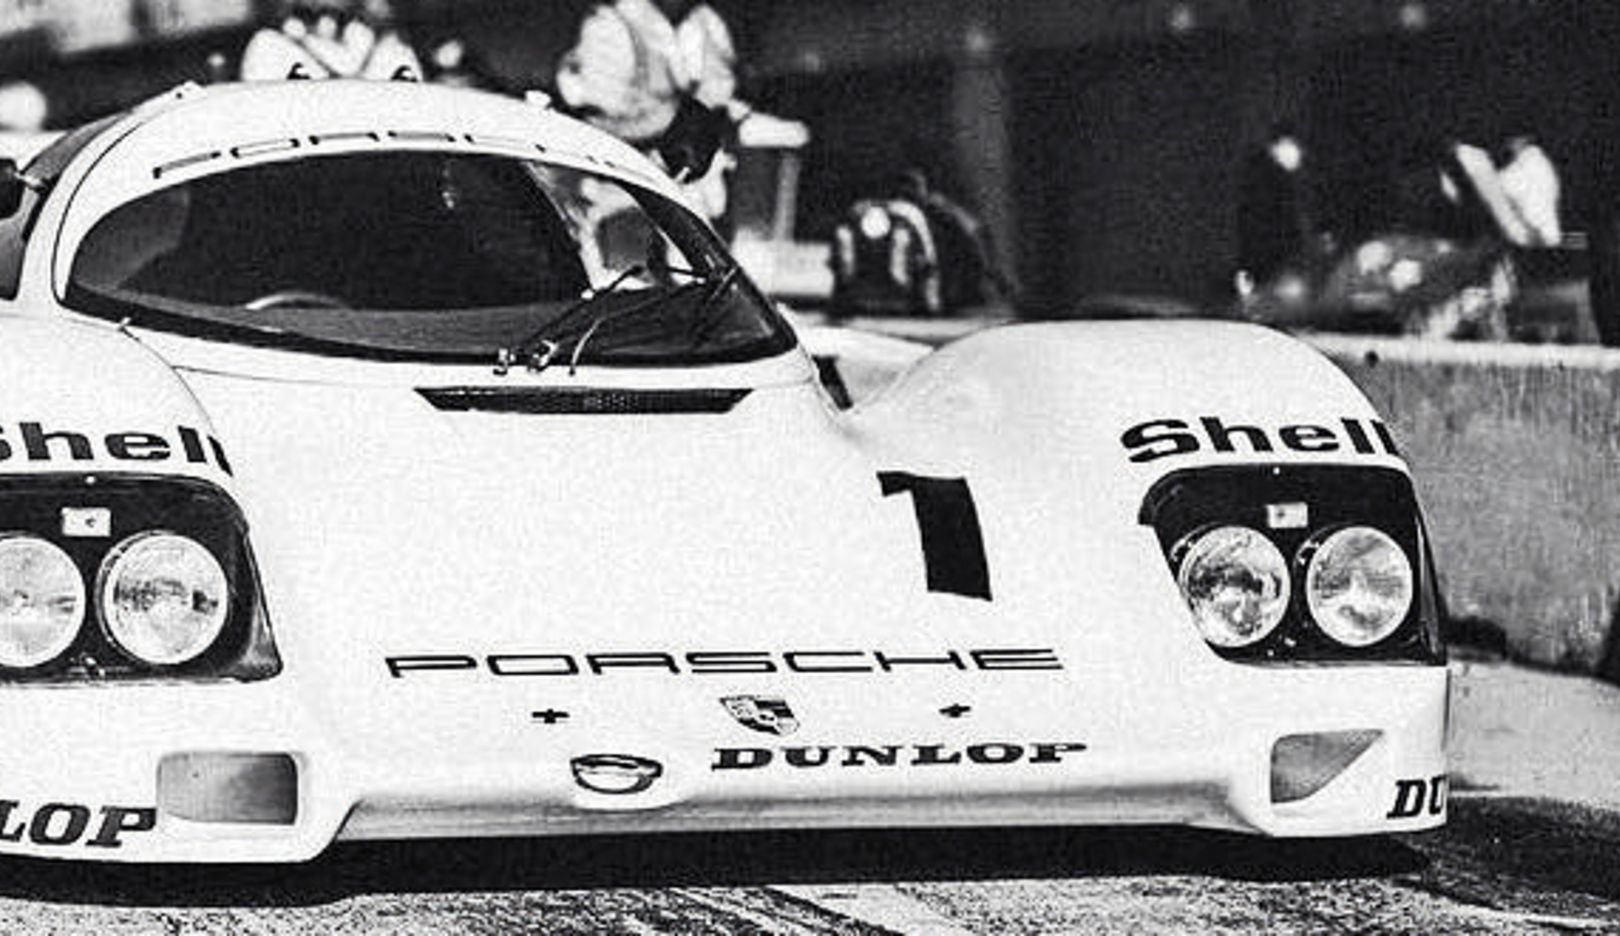 Stripped down: The purist design of this Porsche 962 is stunning in black and white.